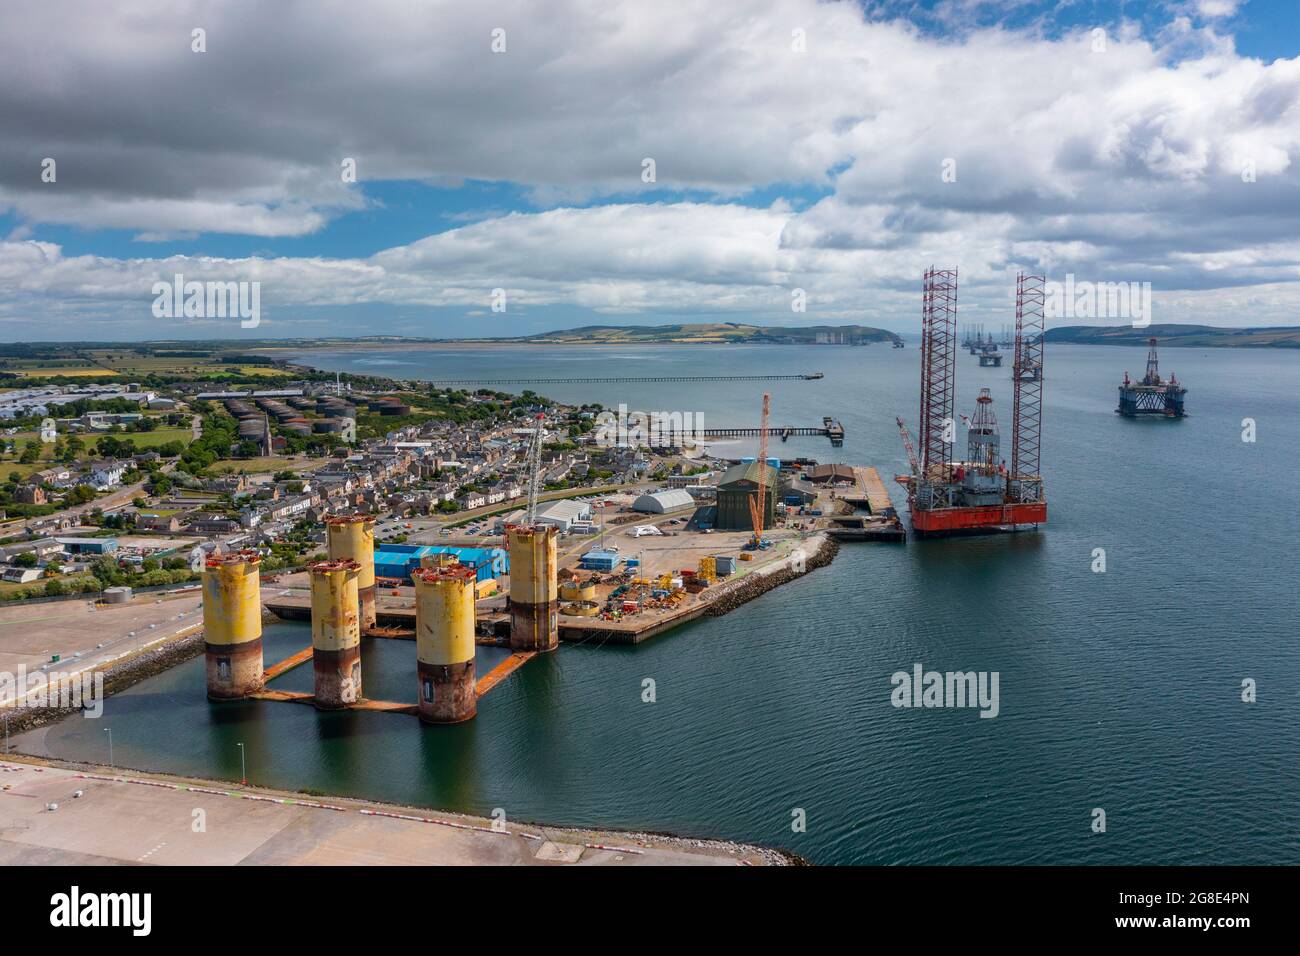 Aerial view from drone of Port of Cromarty Firth at Invergordon, Cromarty Firth, Scotland, UK Stock Photo